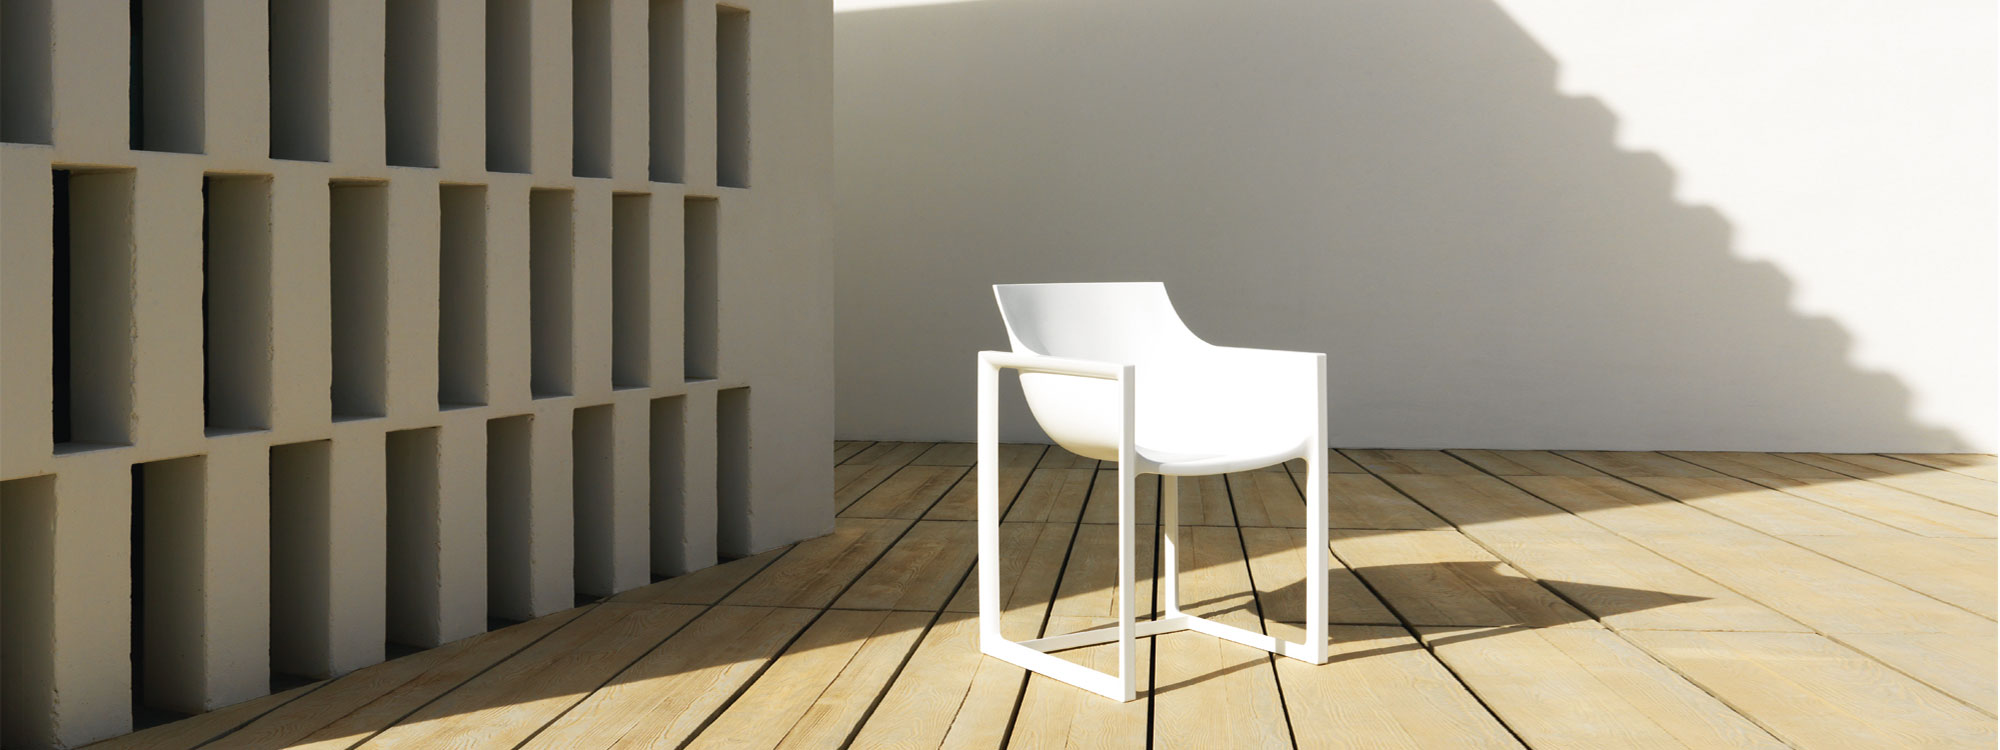 Image of white Wall Street injection molded contract chair by Vondom on sunny terrace